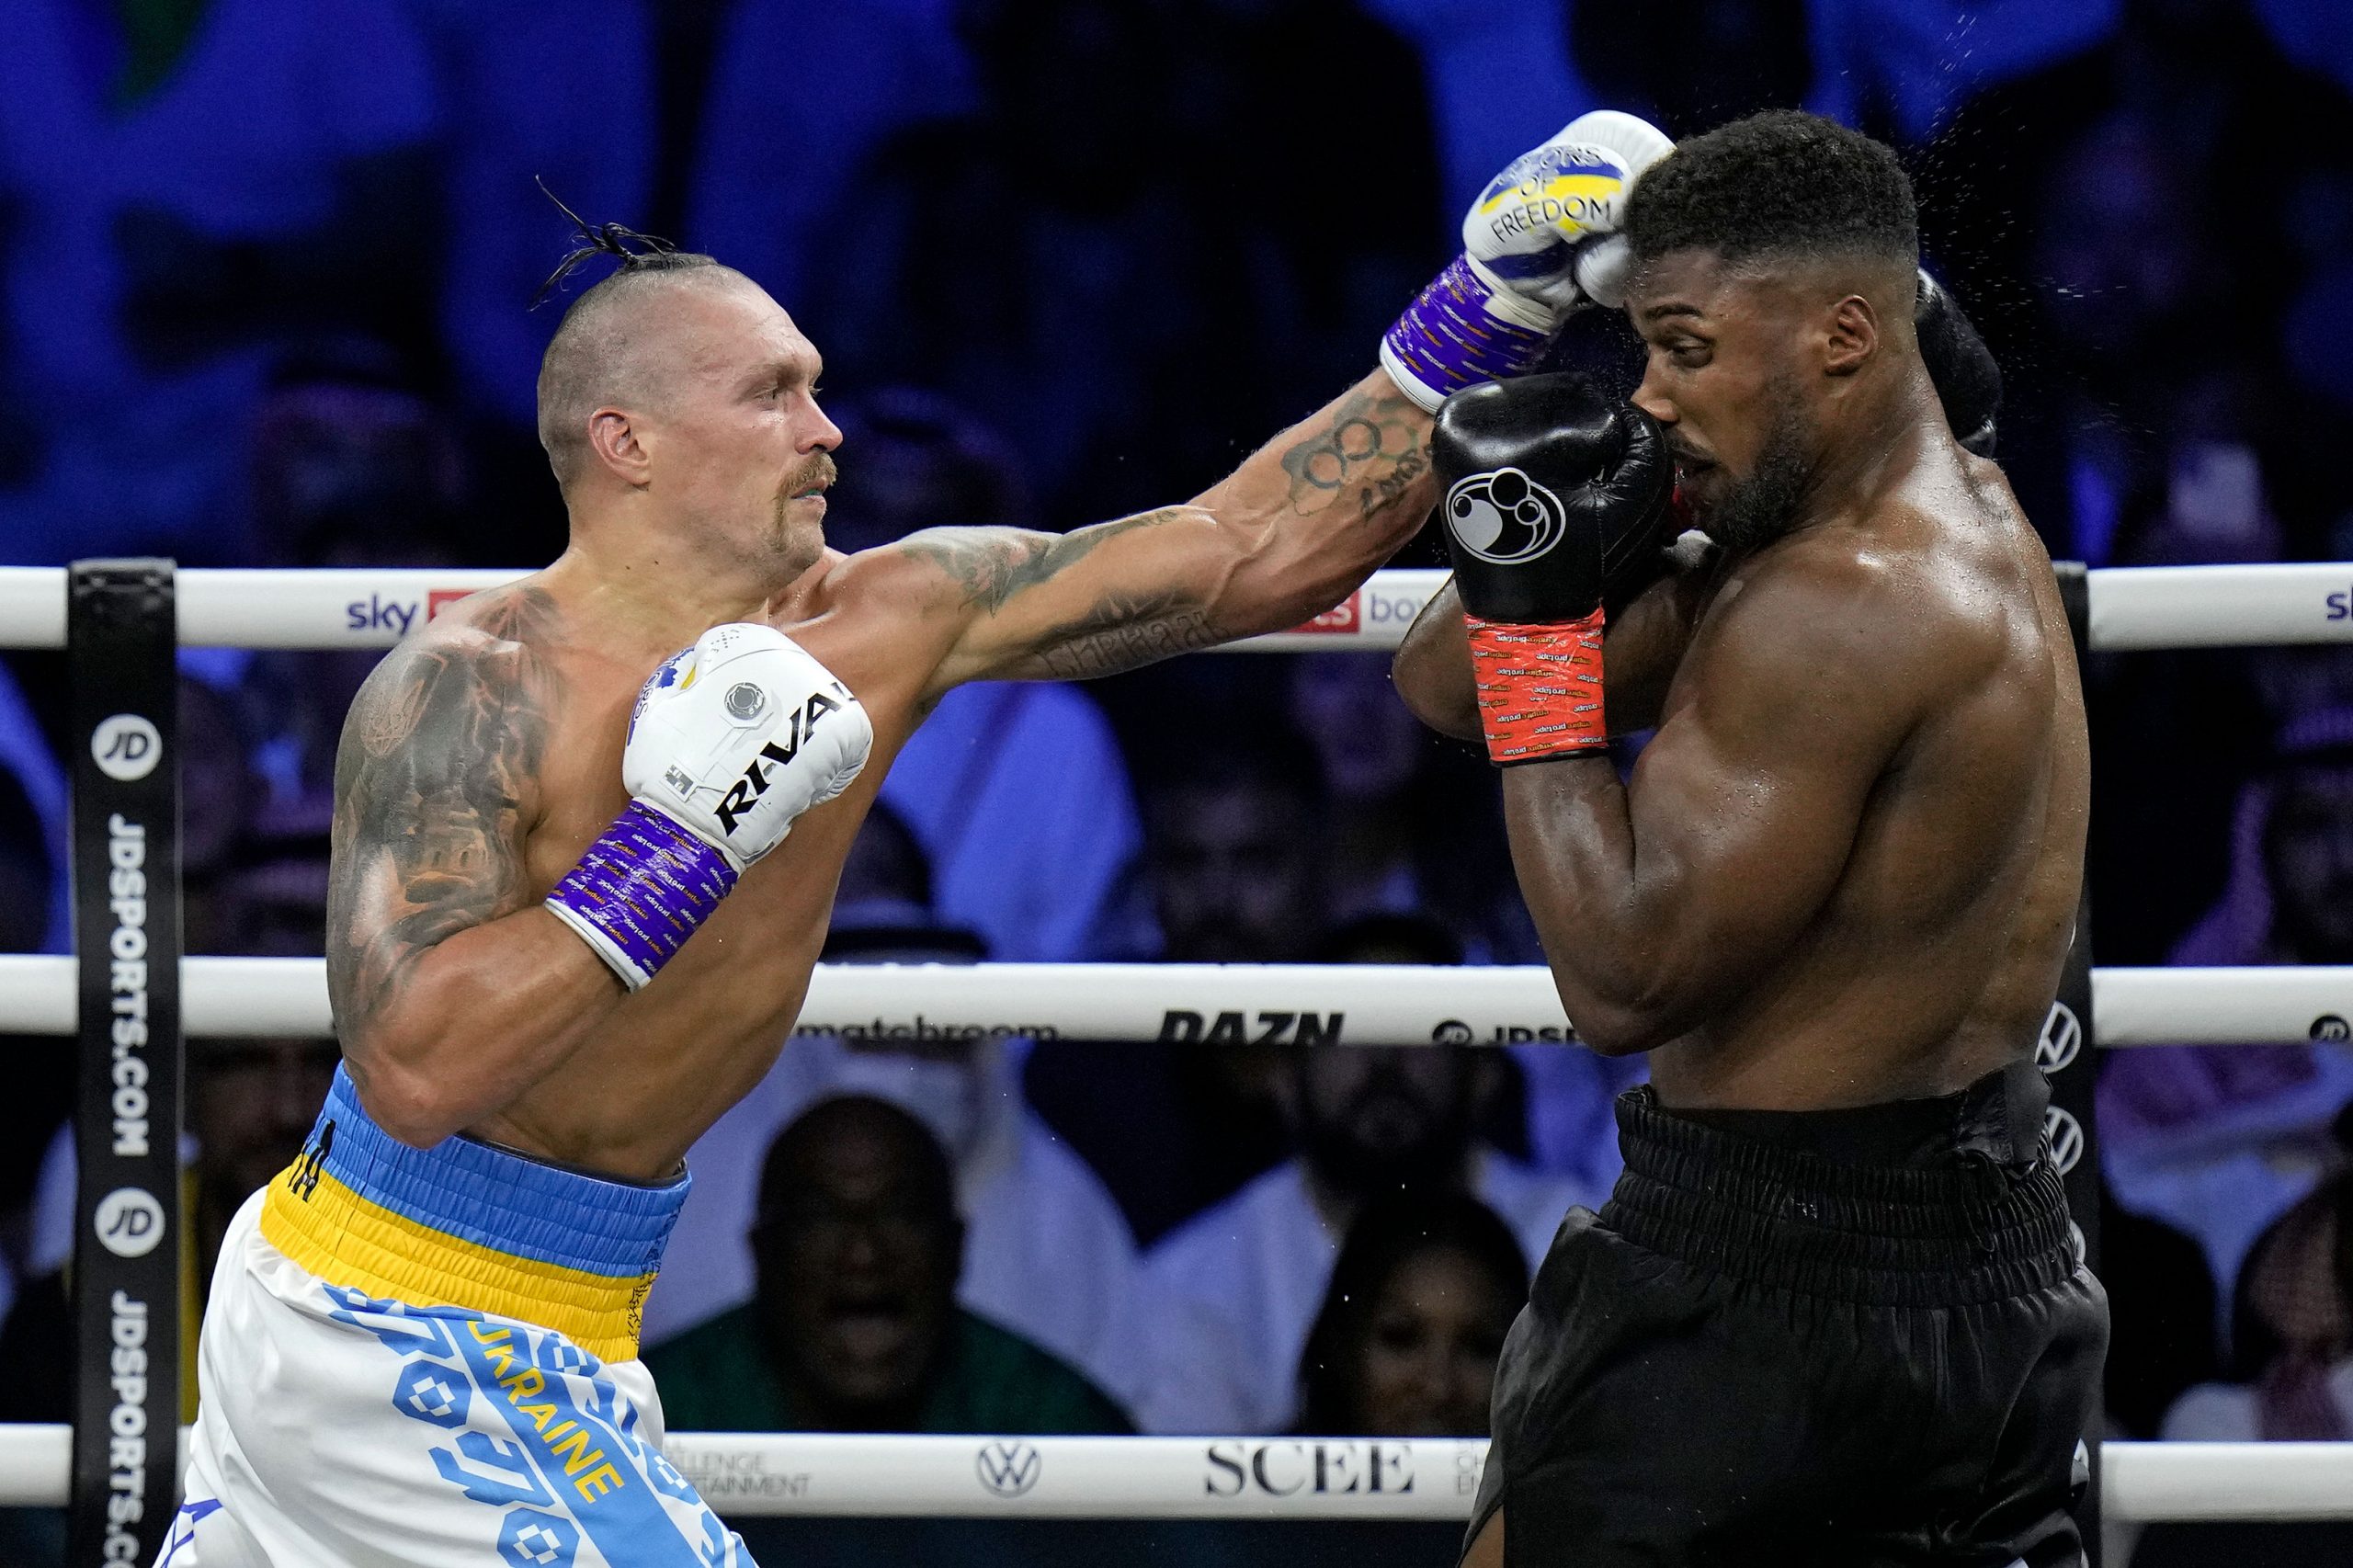 Watch: Judge confronted after controversially scoring Usyk vs Joshua